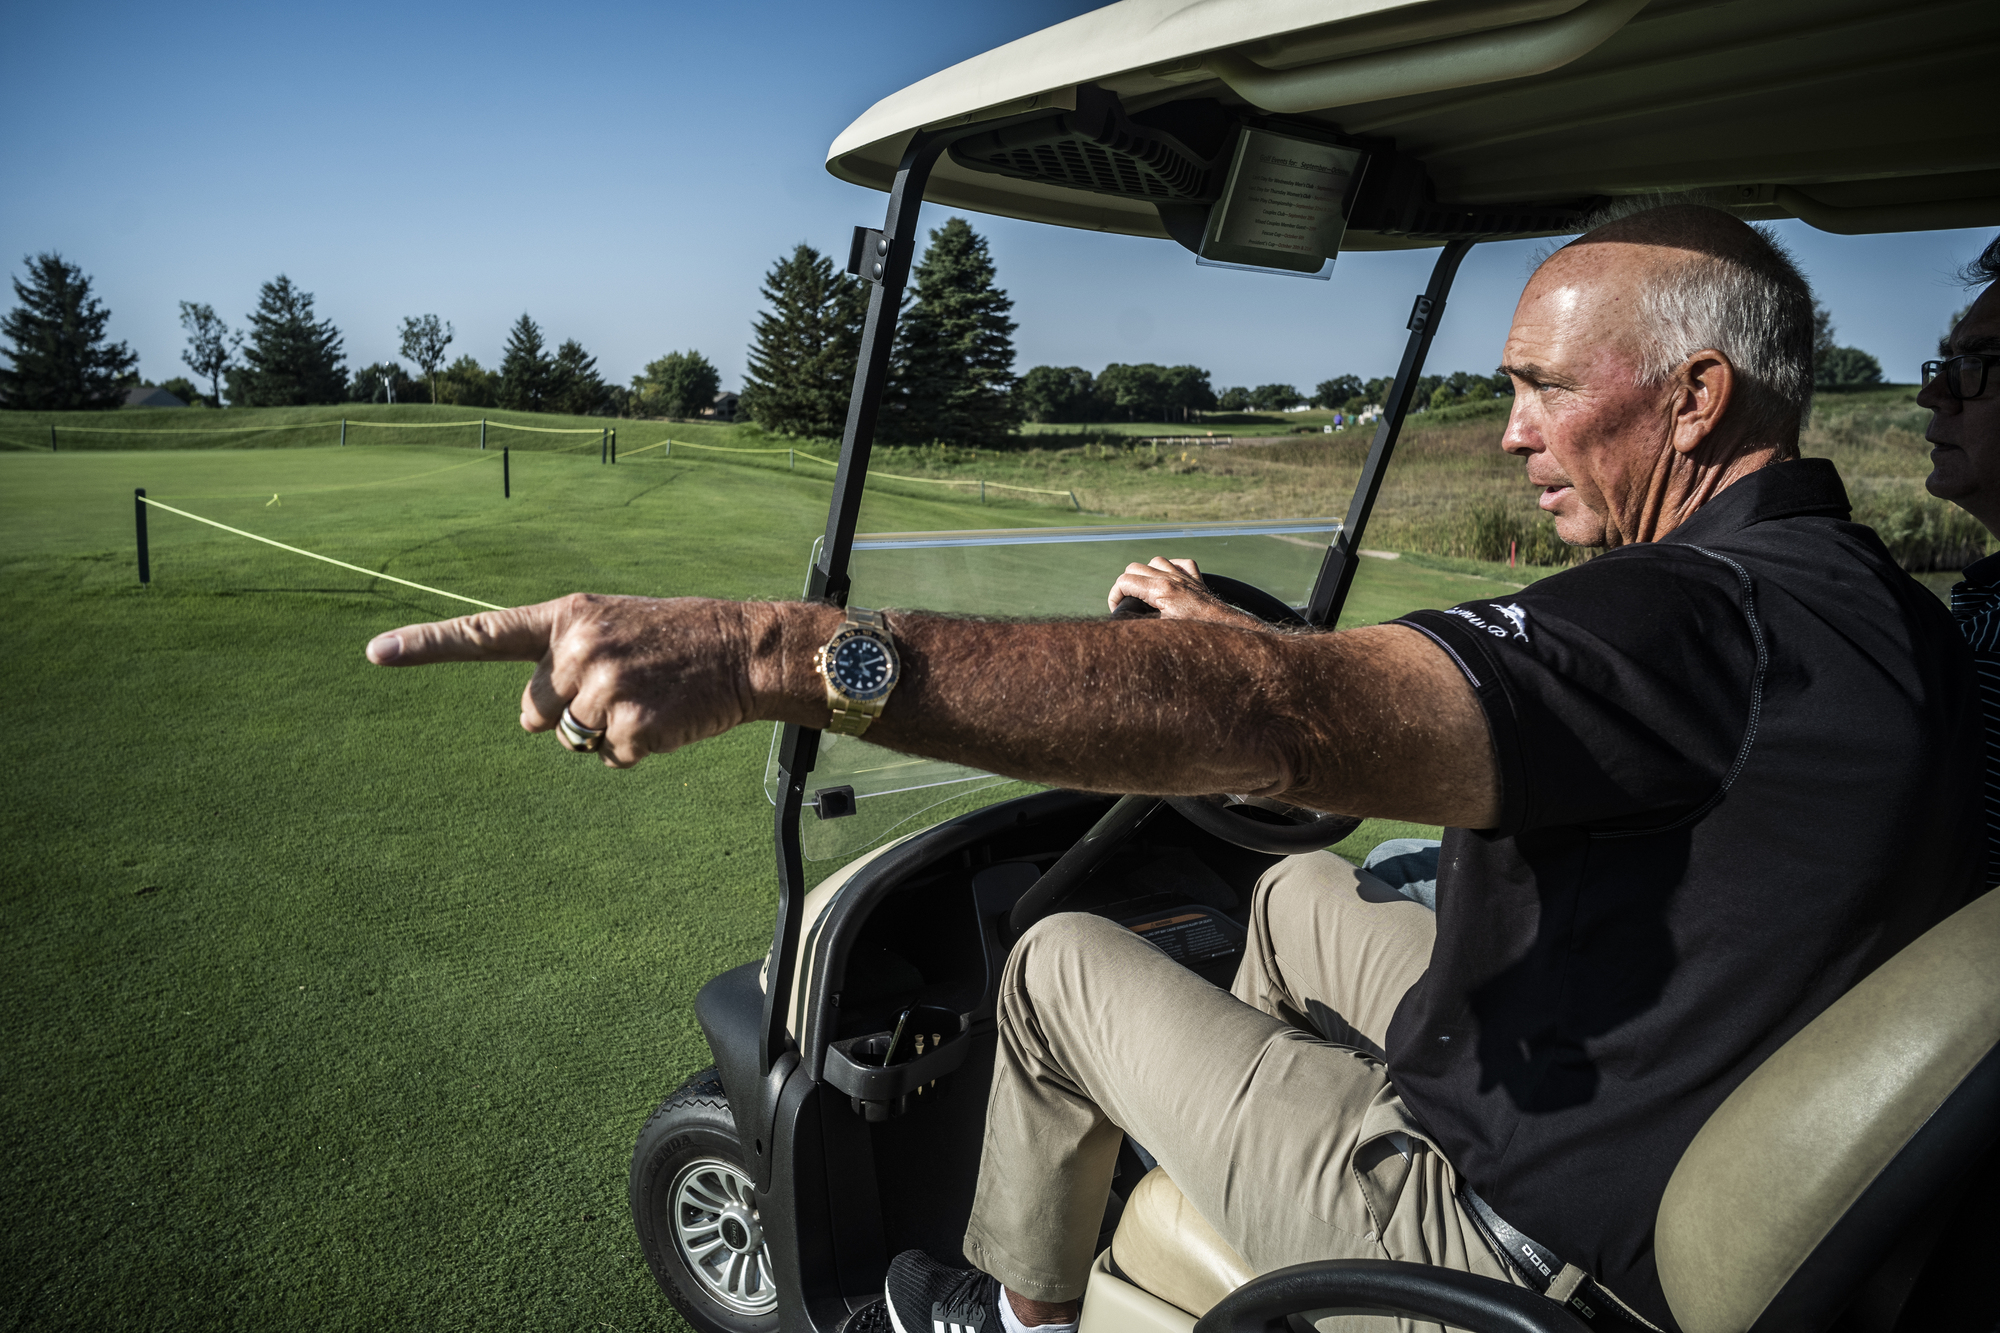 Tom Lehman has implemented changes that will make a pro golfer test his game.] Pro golfer and Minnesotan Tom Lehman will be walking around the TPC Twin Cities golf course, set for next year's PGA tour stop, to show and talk about changes to be made. Richard.Tsong-Taatarii@startribune.com